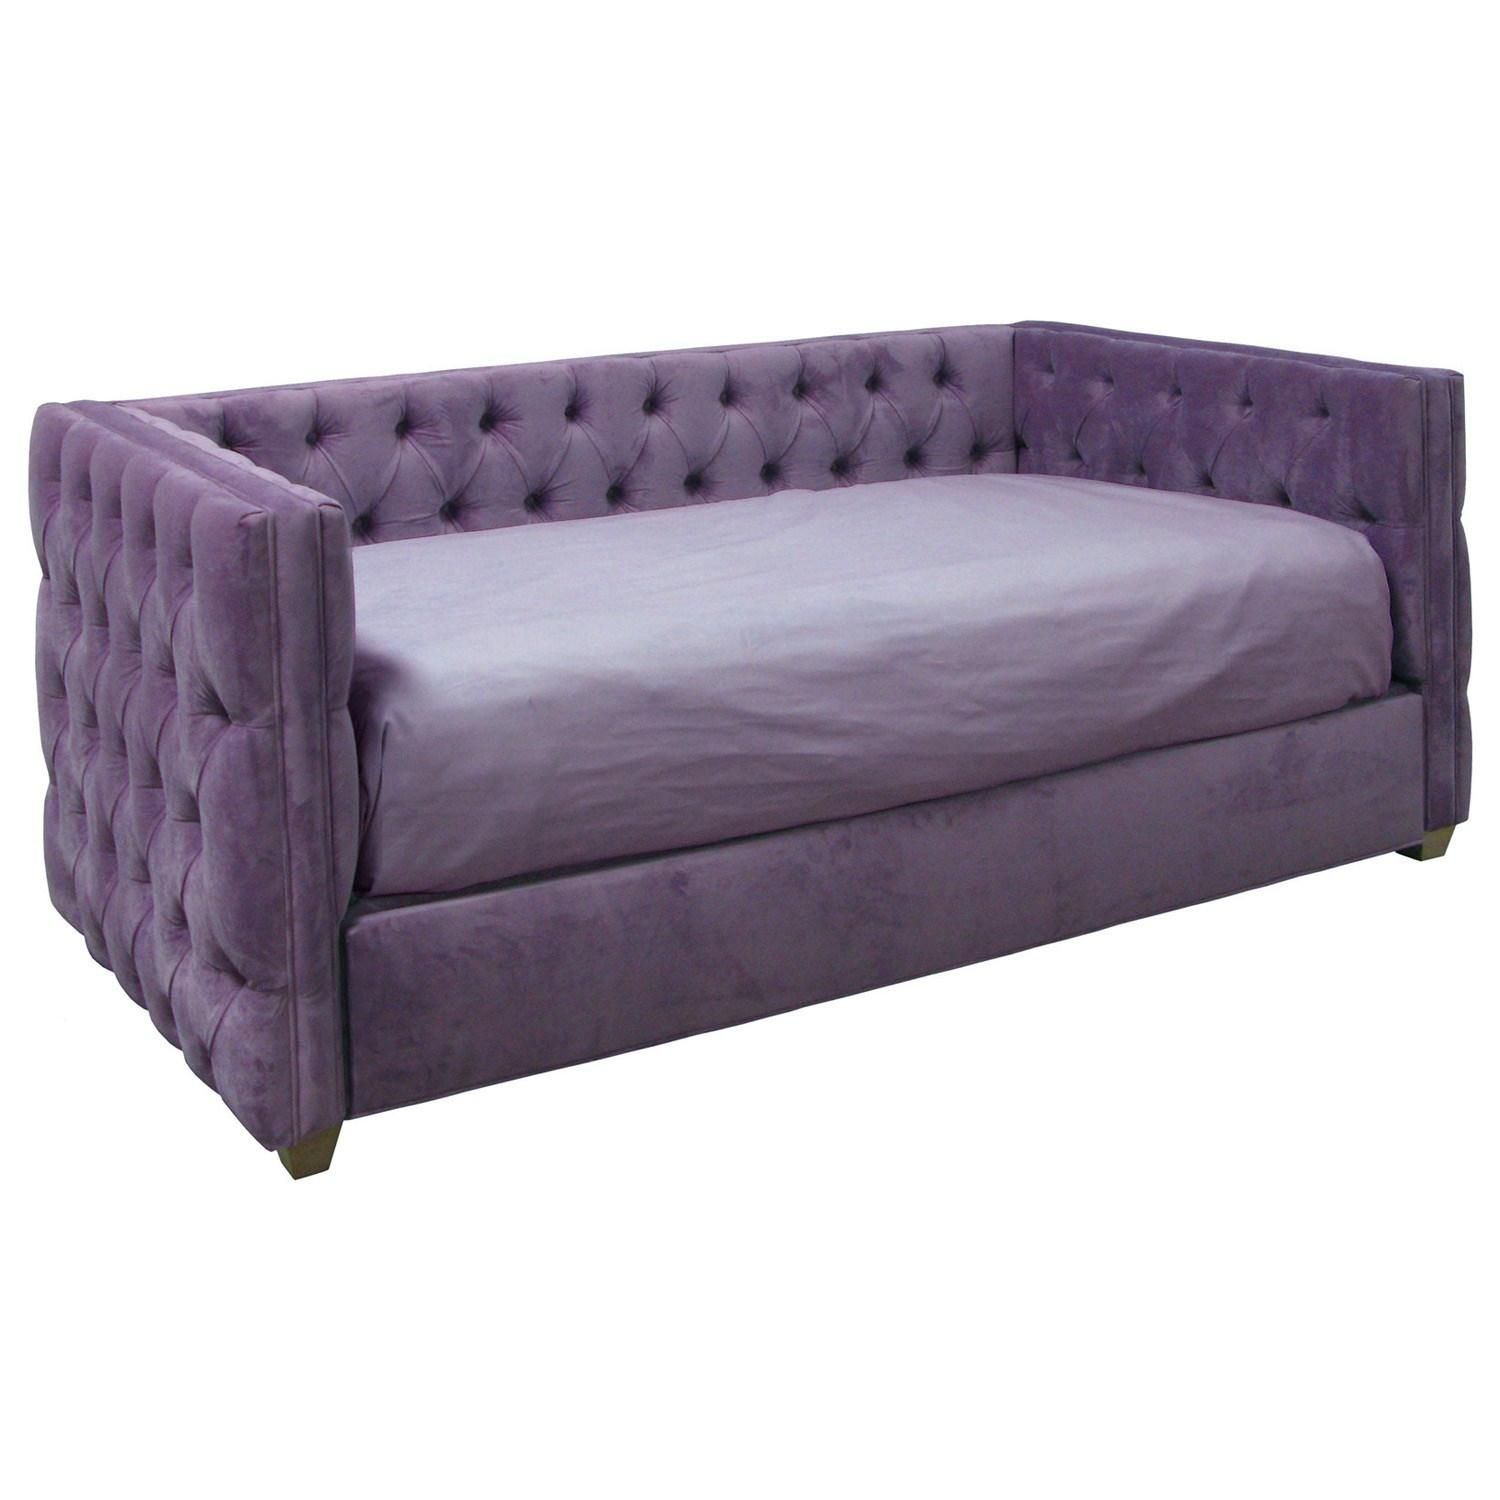 Hollywood Sofa Daybed In Purple Velvetafk Art For Kids Throughout Sofa Day Beds (View 6 of 20)